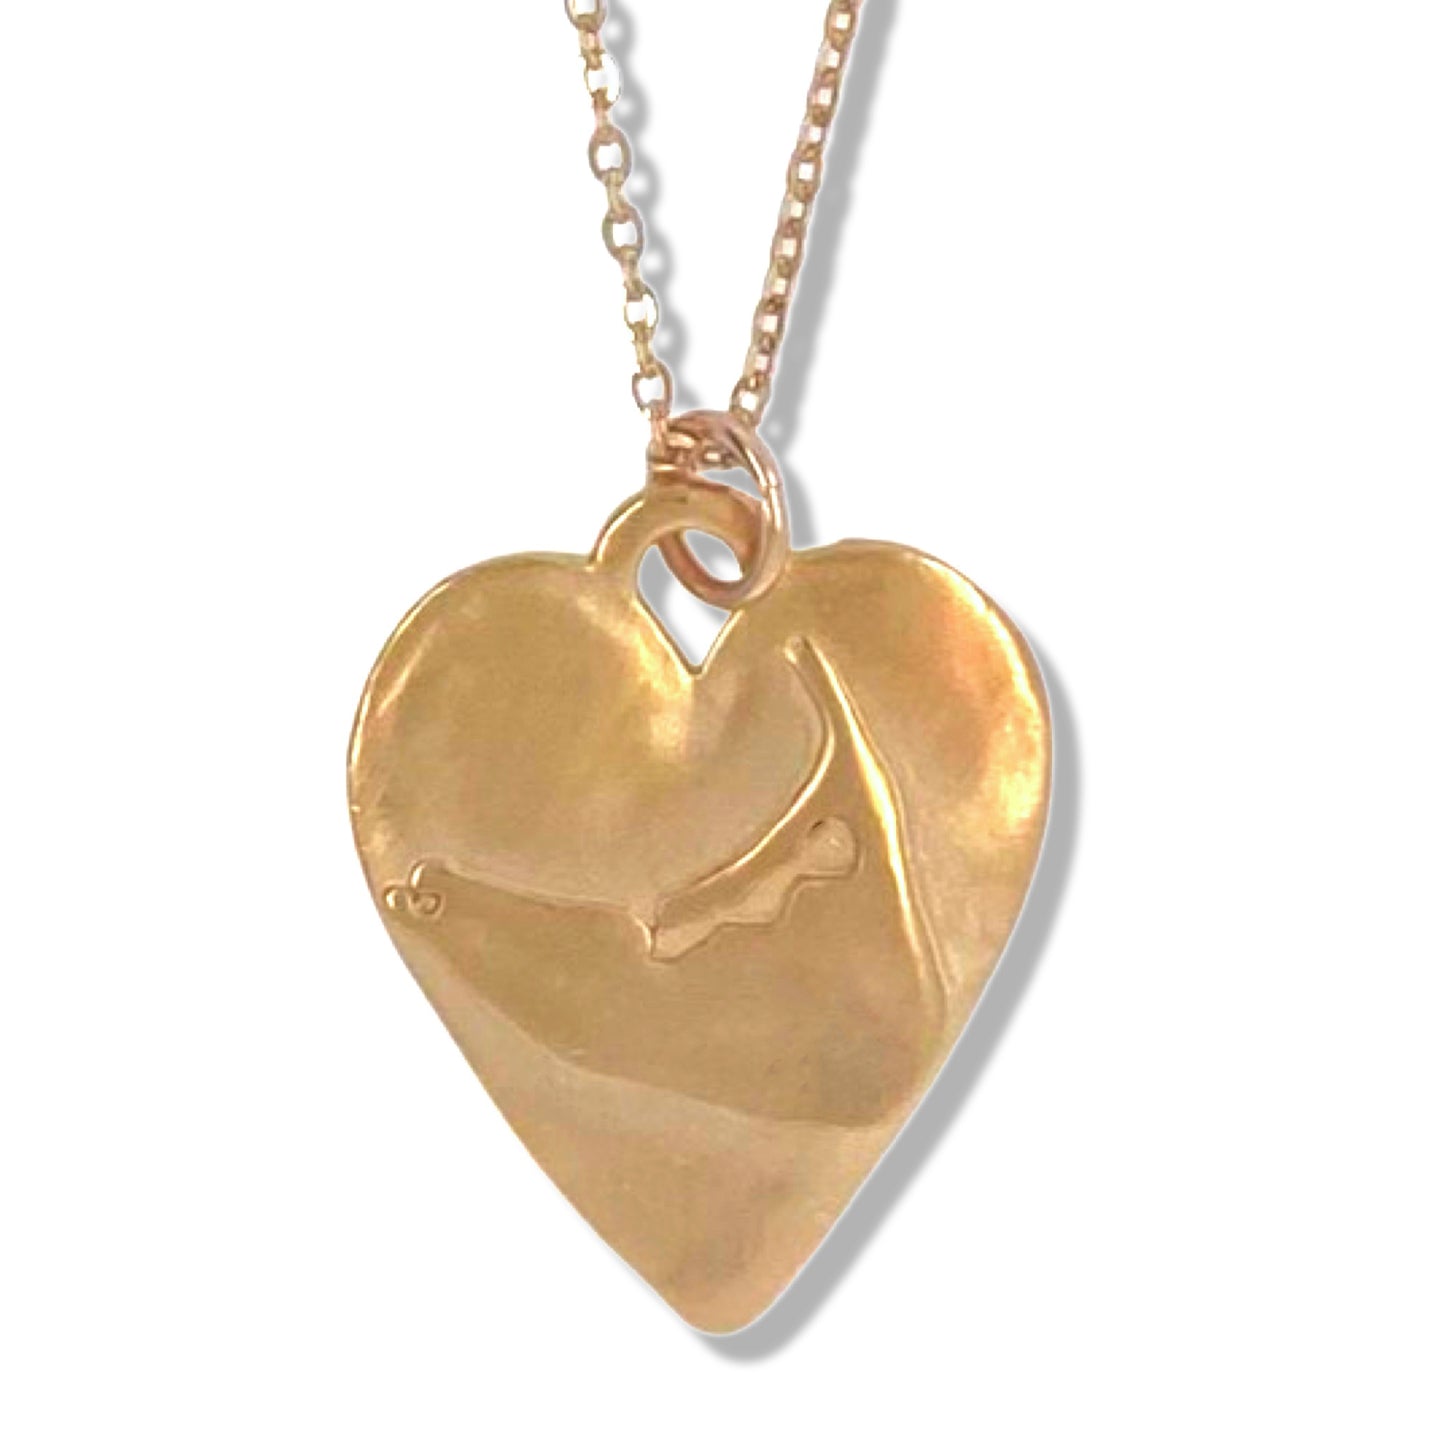 714NLG - Nantucket Large Heart Necklace in Gold